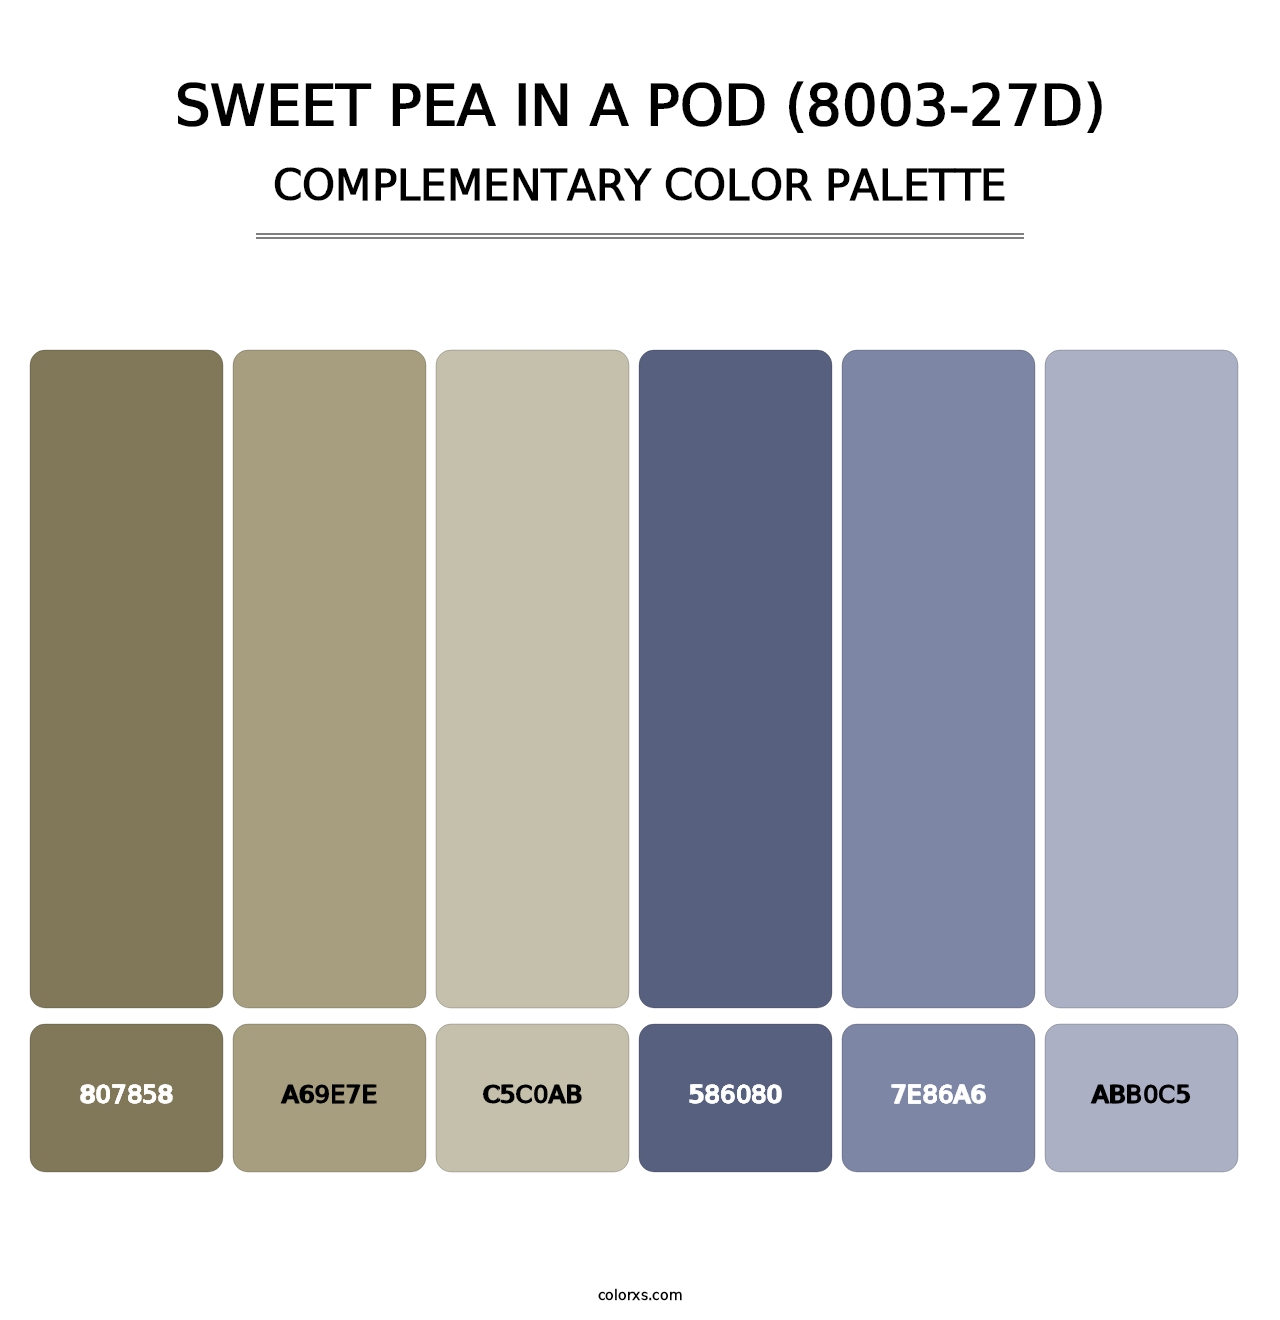 Sweet Pea in a Pod (8003-27D) - Complementary Color Palette